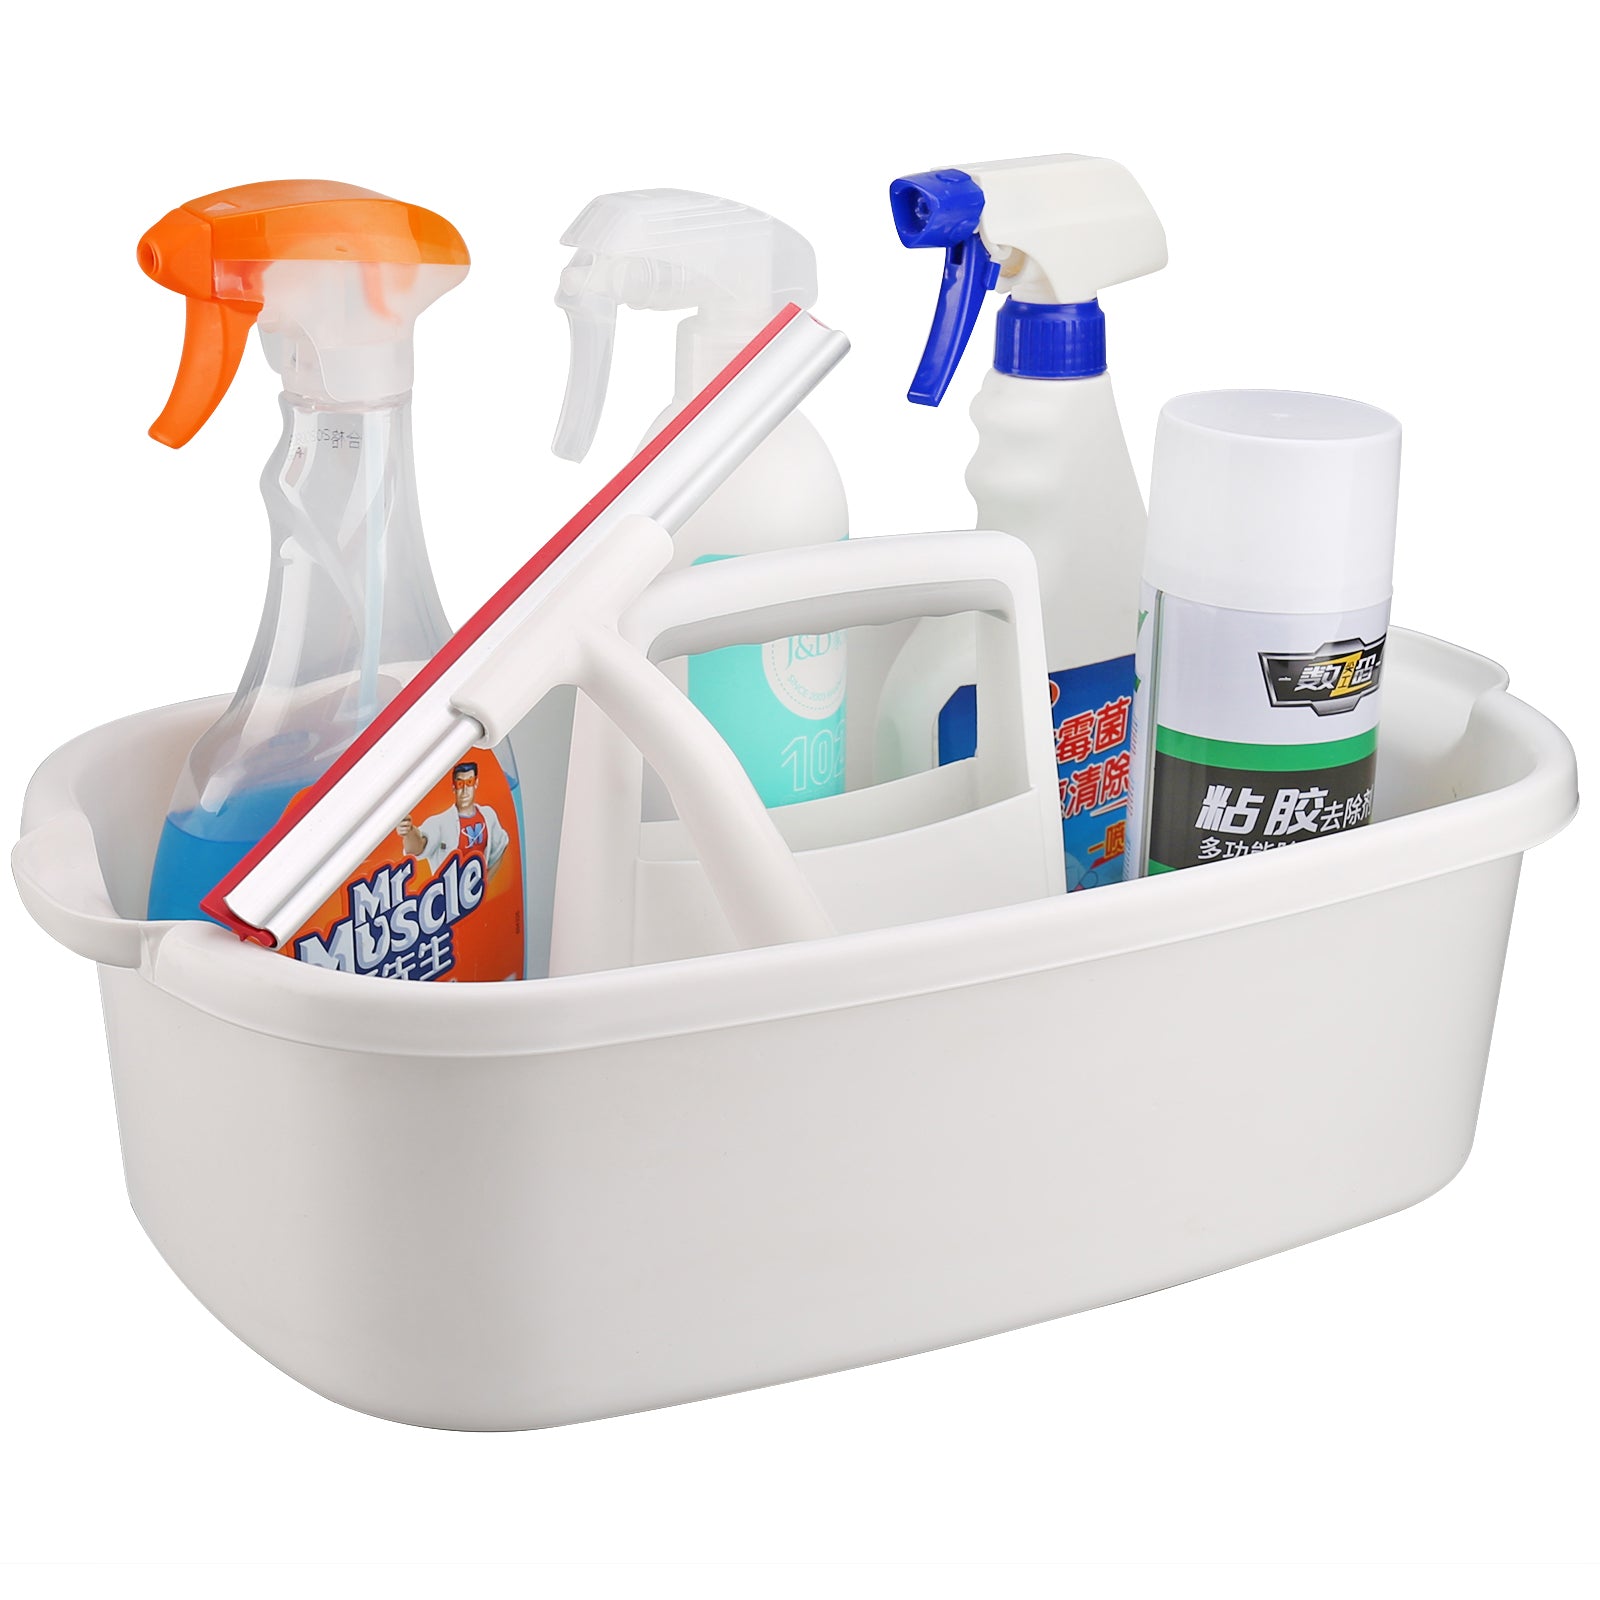 Undersink Cleaning Caddy